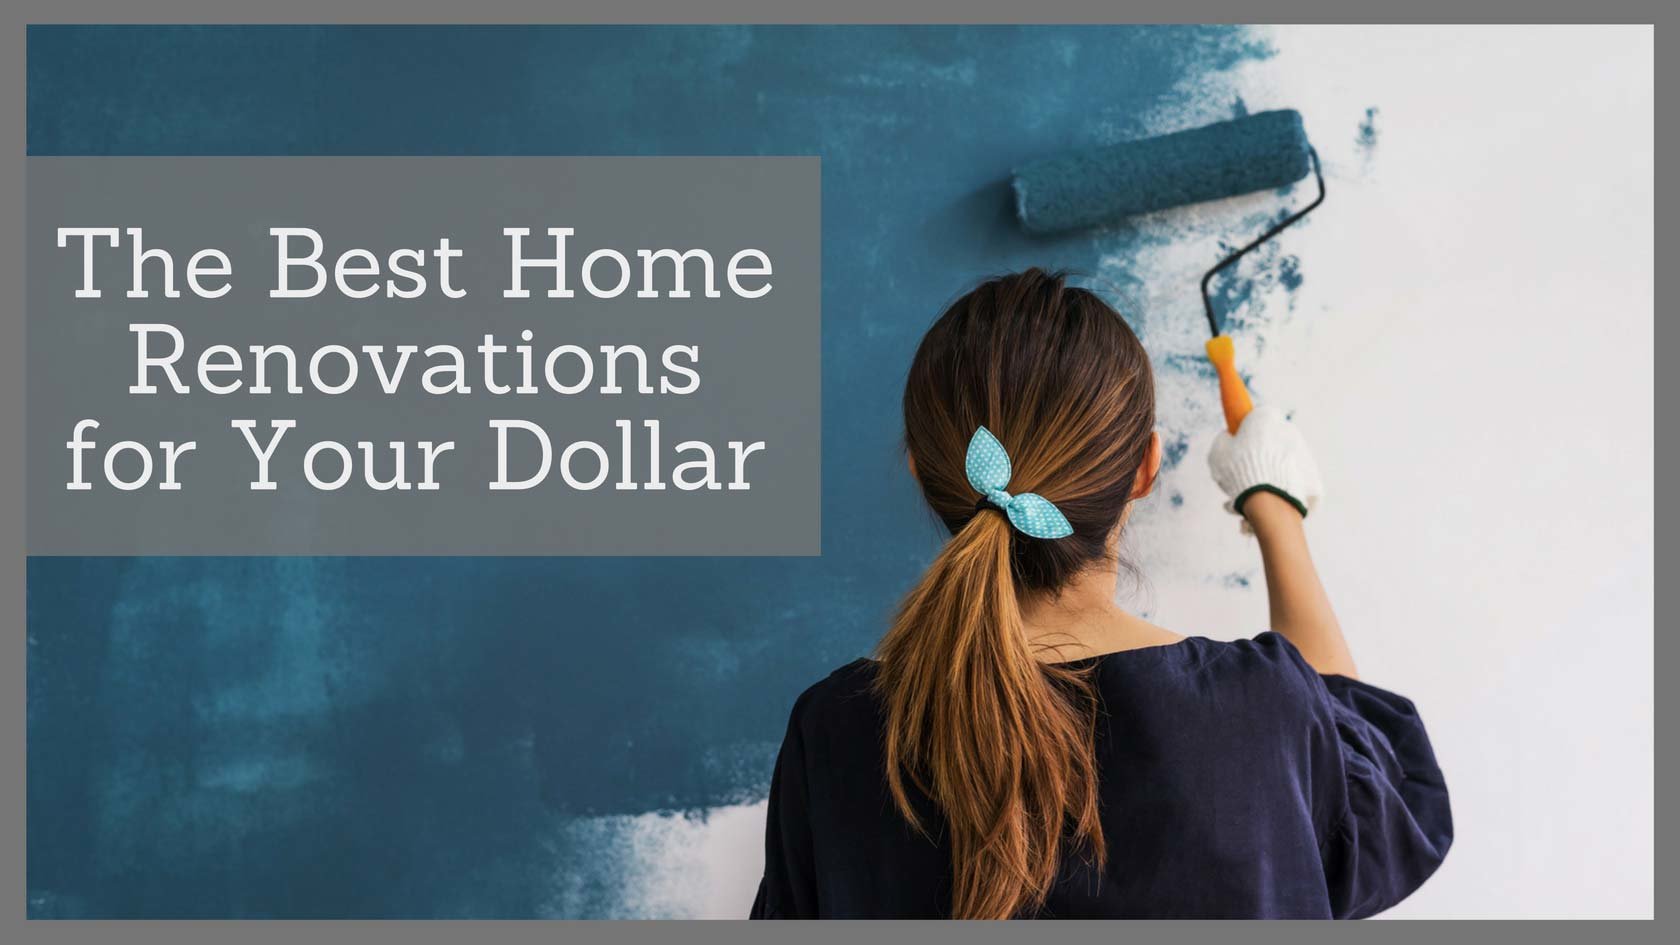 The Best Home Renovations for Your Dollar